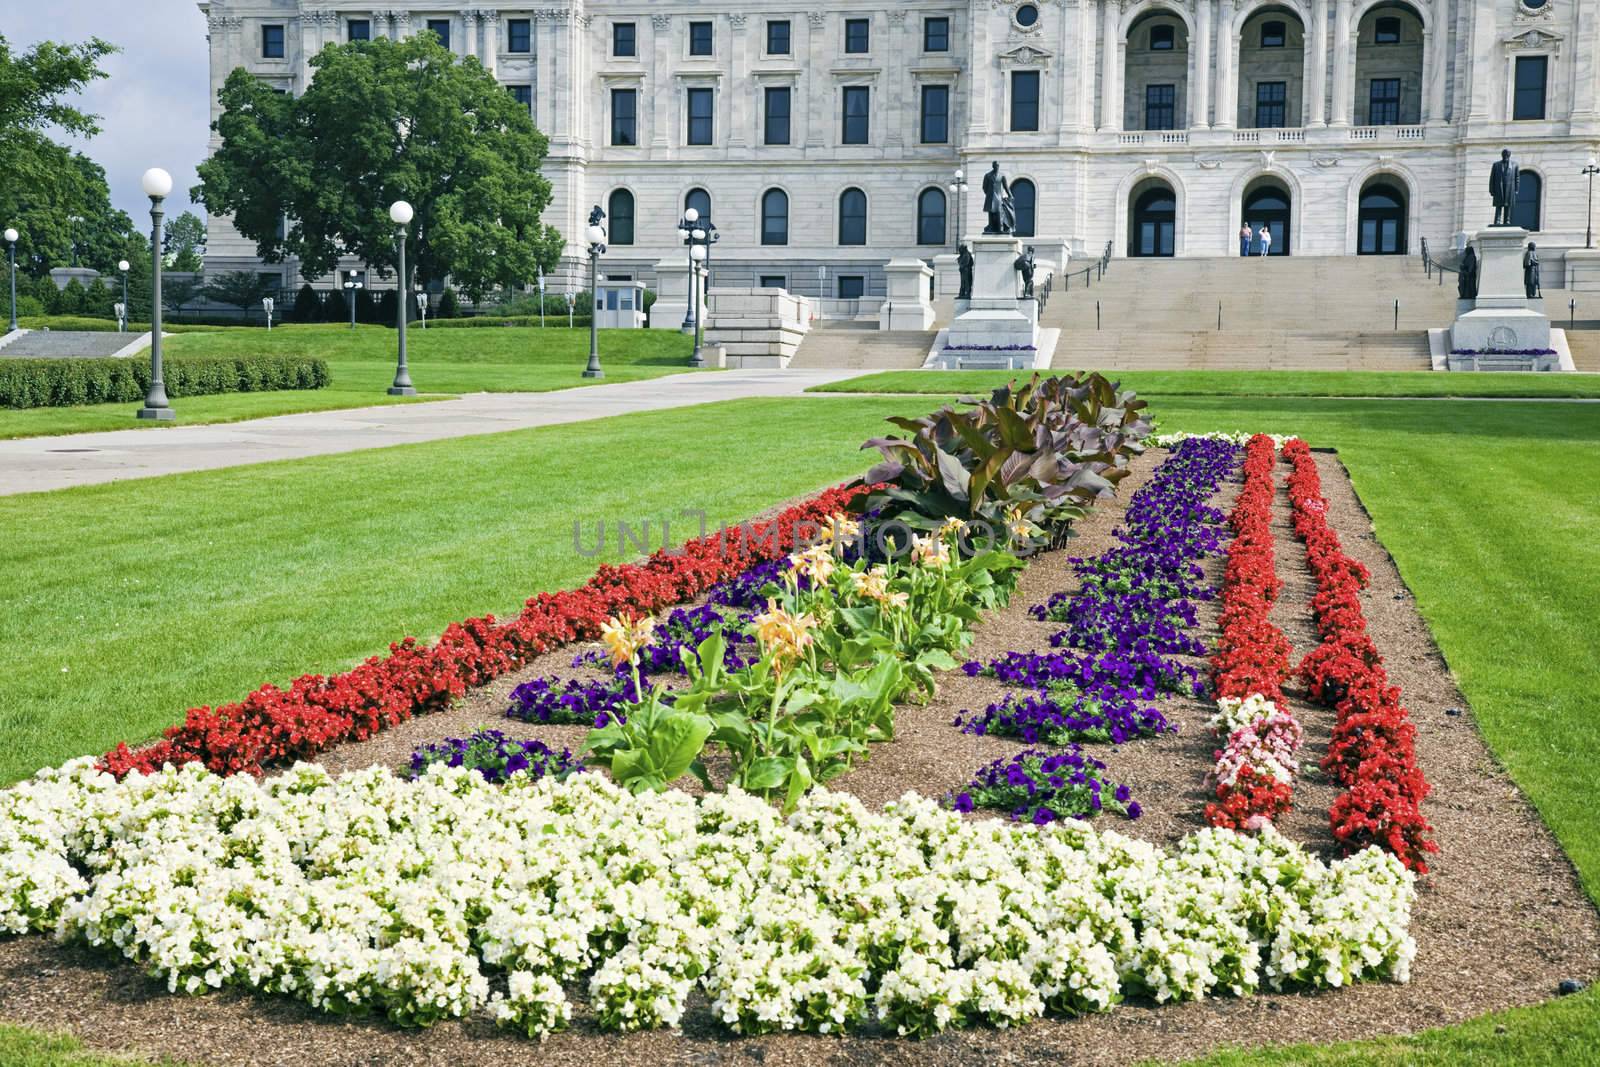 Flowers in front of State Capitol by benkrut